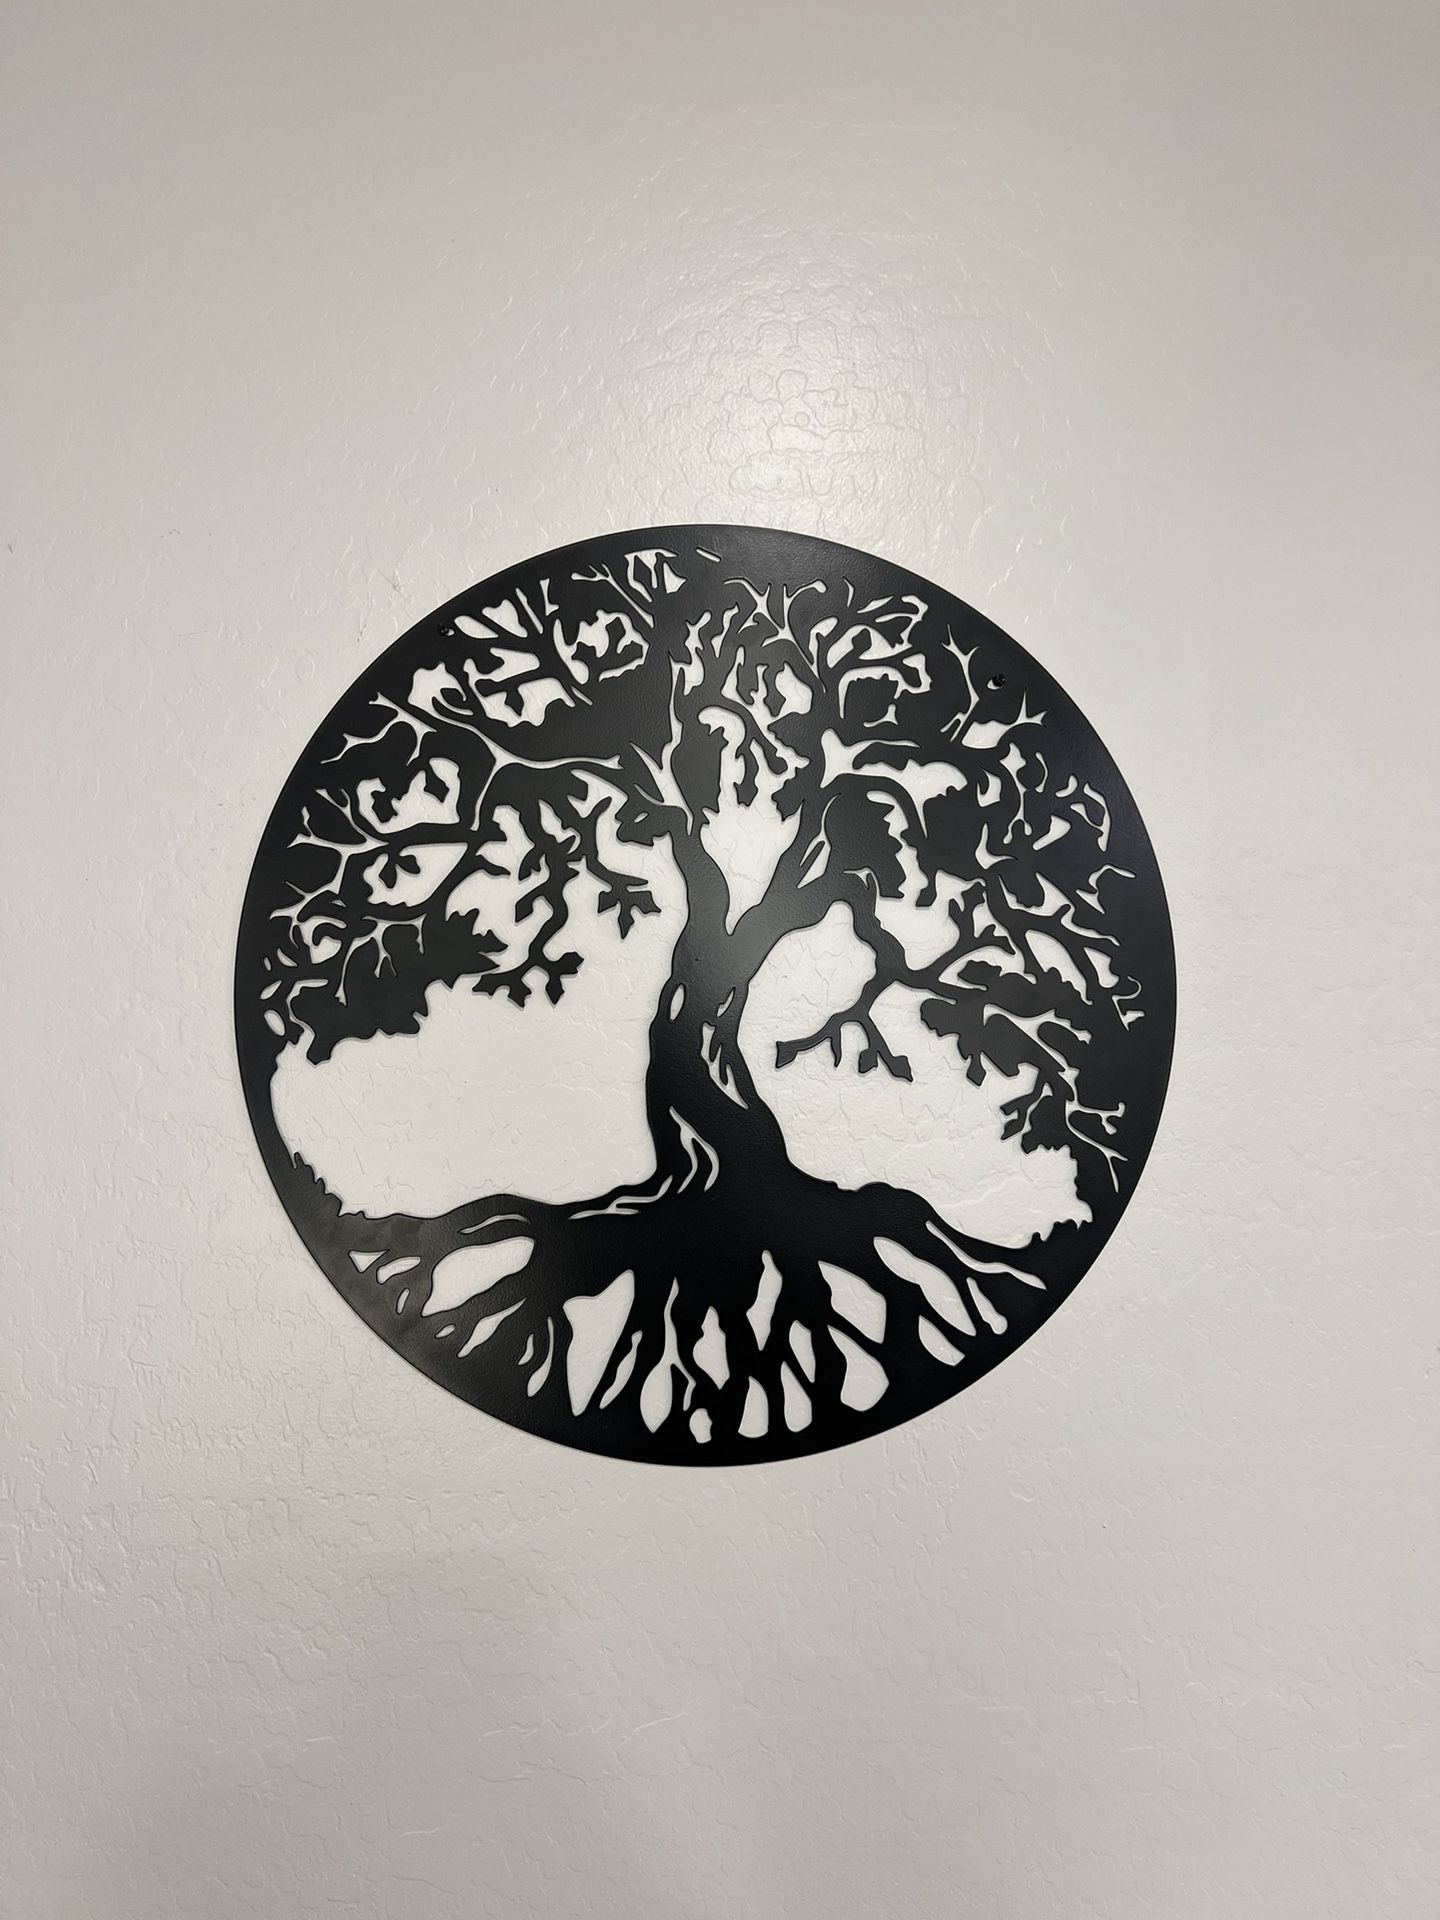 Laser Etched Stainless Steel Tree Wall Decor 